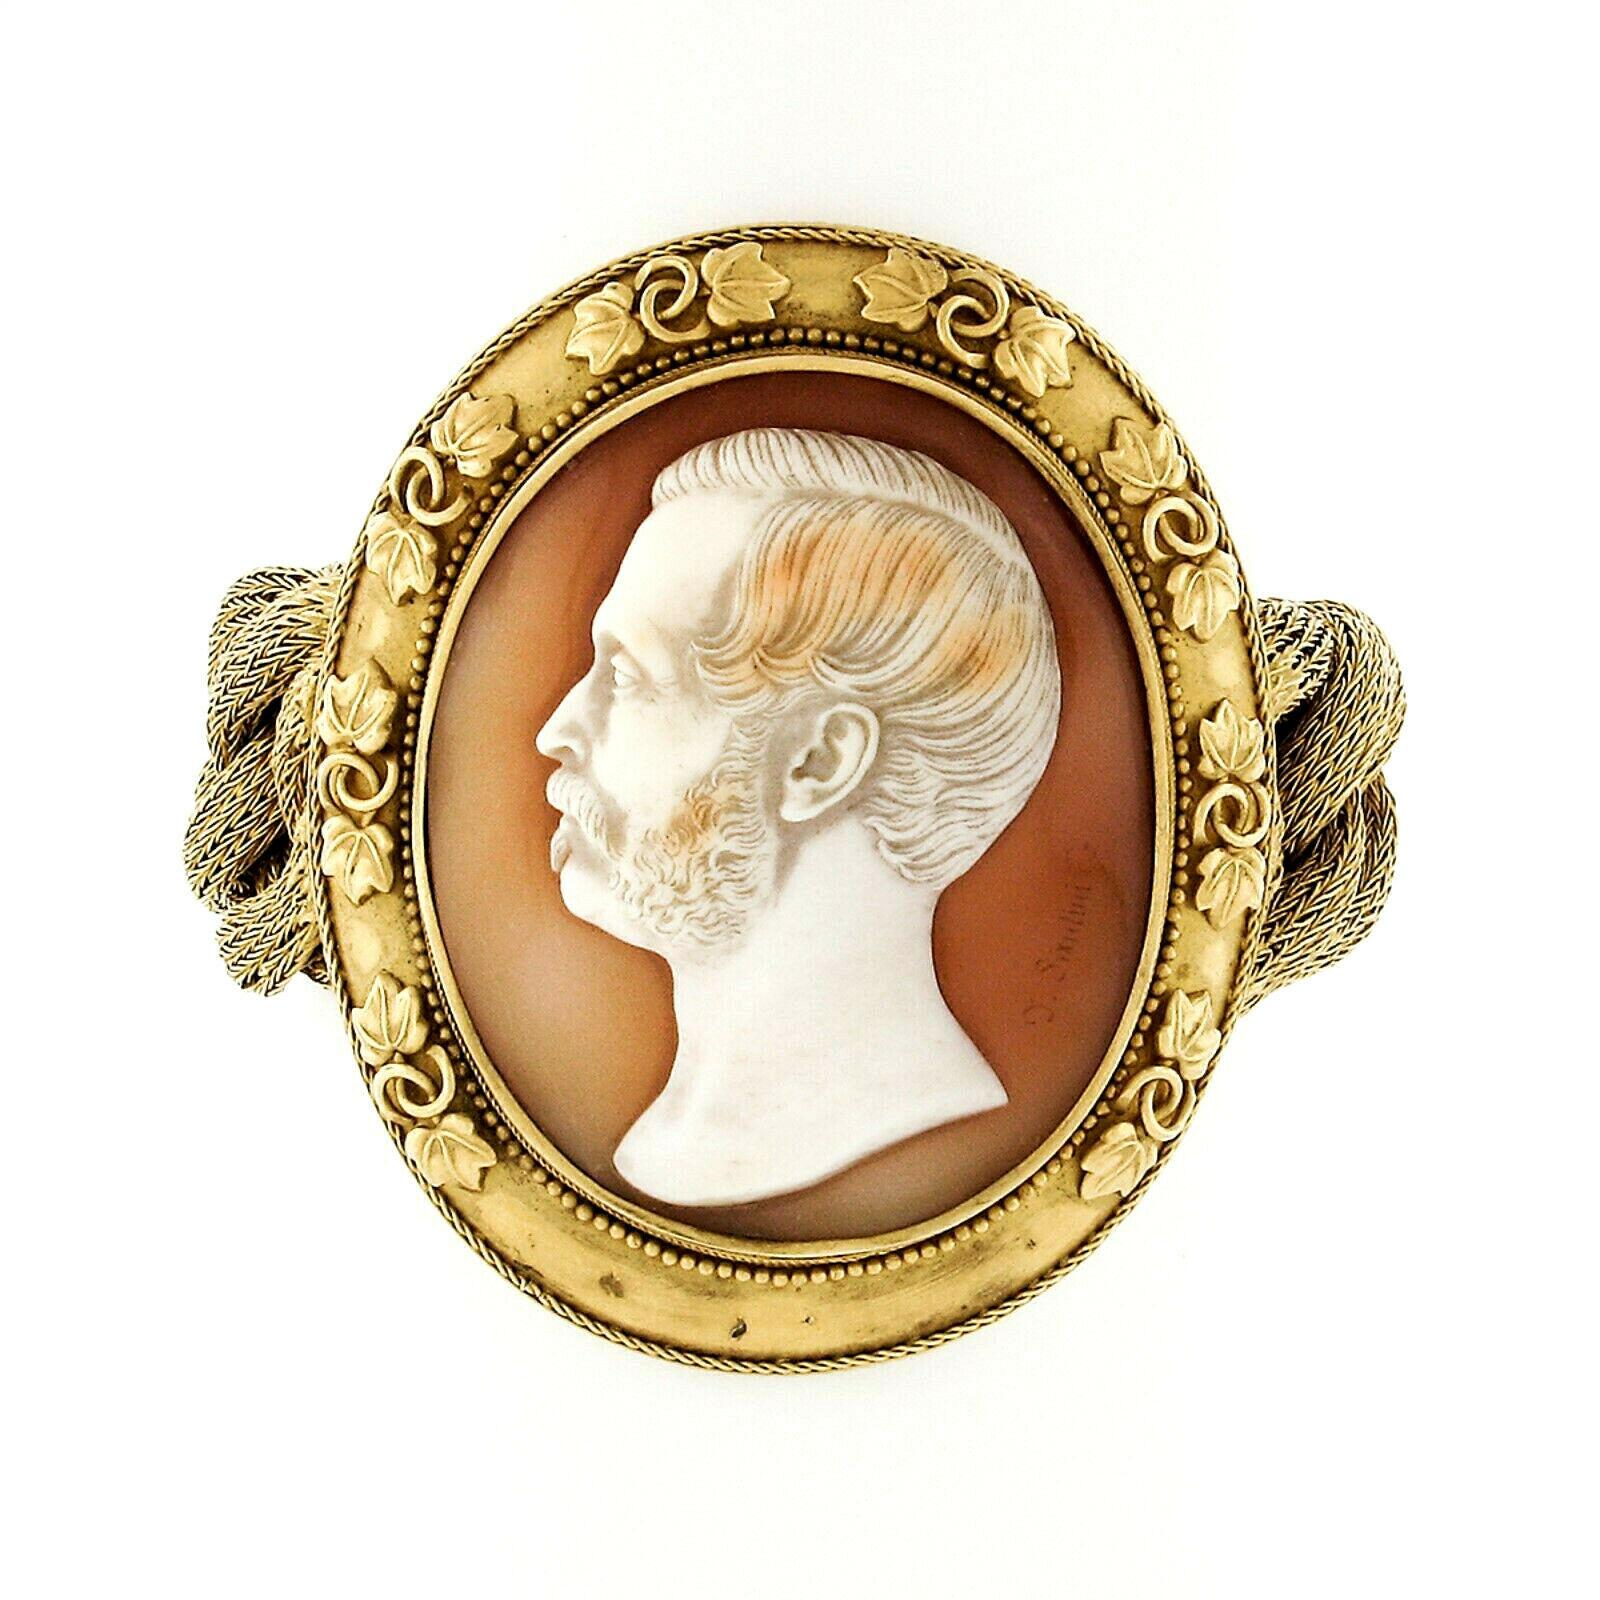 This incredibly designed antique statement piece is crafted in solid 21k gold during the Victorian era. The bracelet features a large center section that carries the amazing shell cameo that's signed by the artist Thomas Saulini. This shell stone is